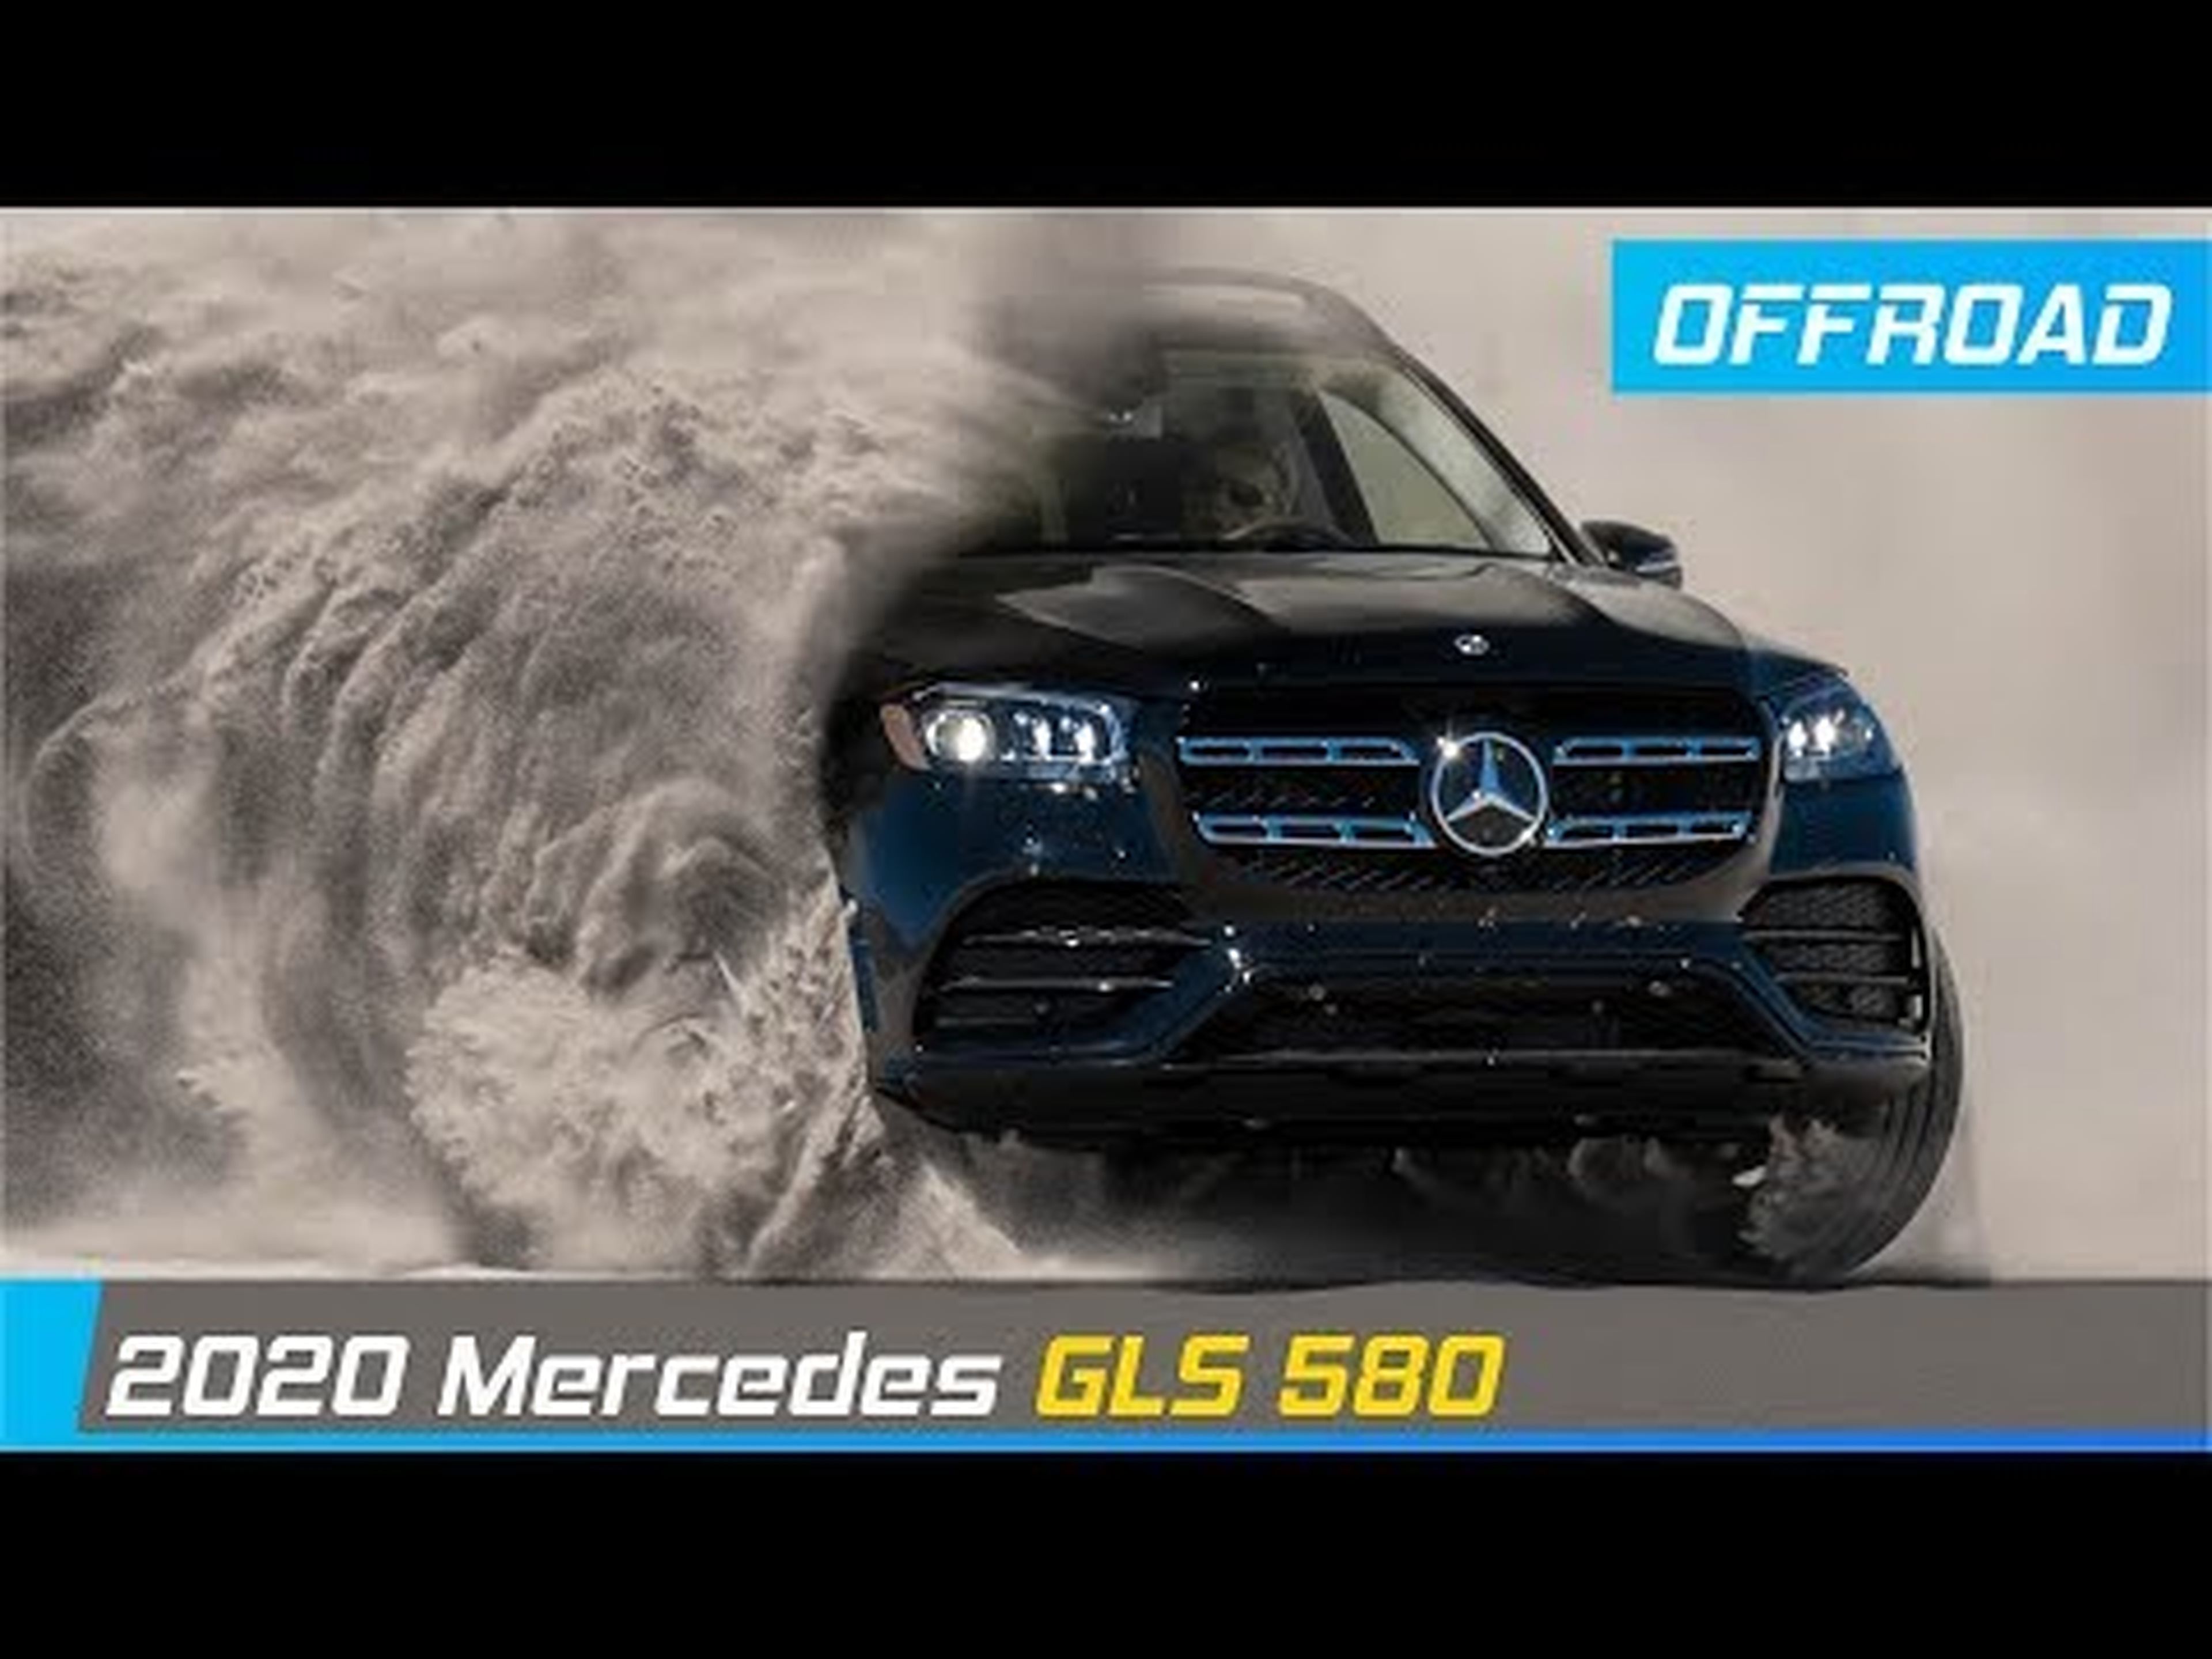 2020 Mercedes GLS Offroad in sand with E-ACTIVE BODY CONTROL